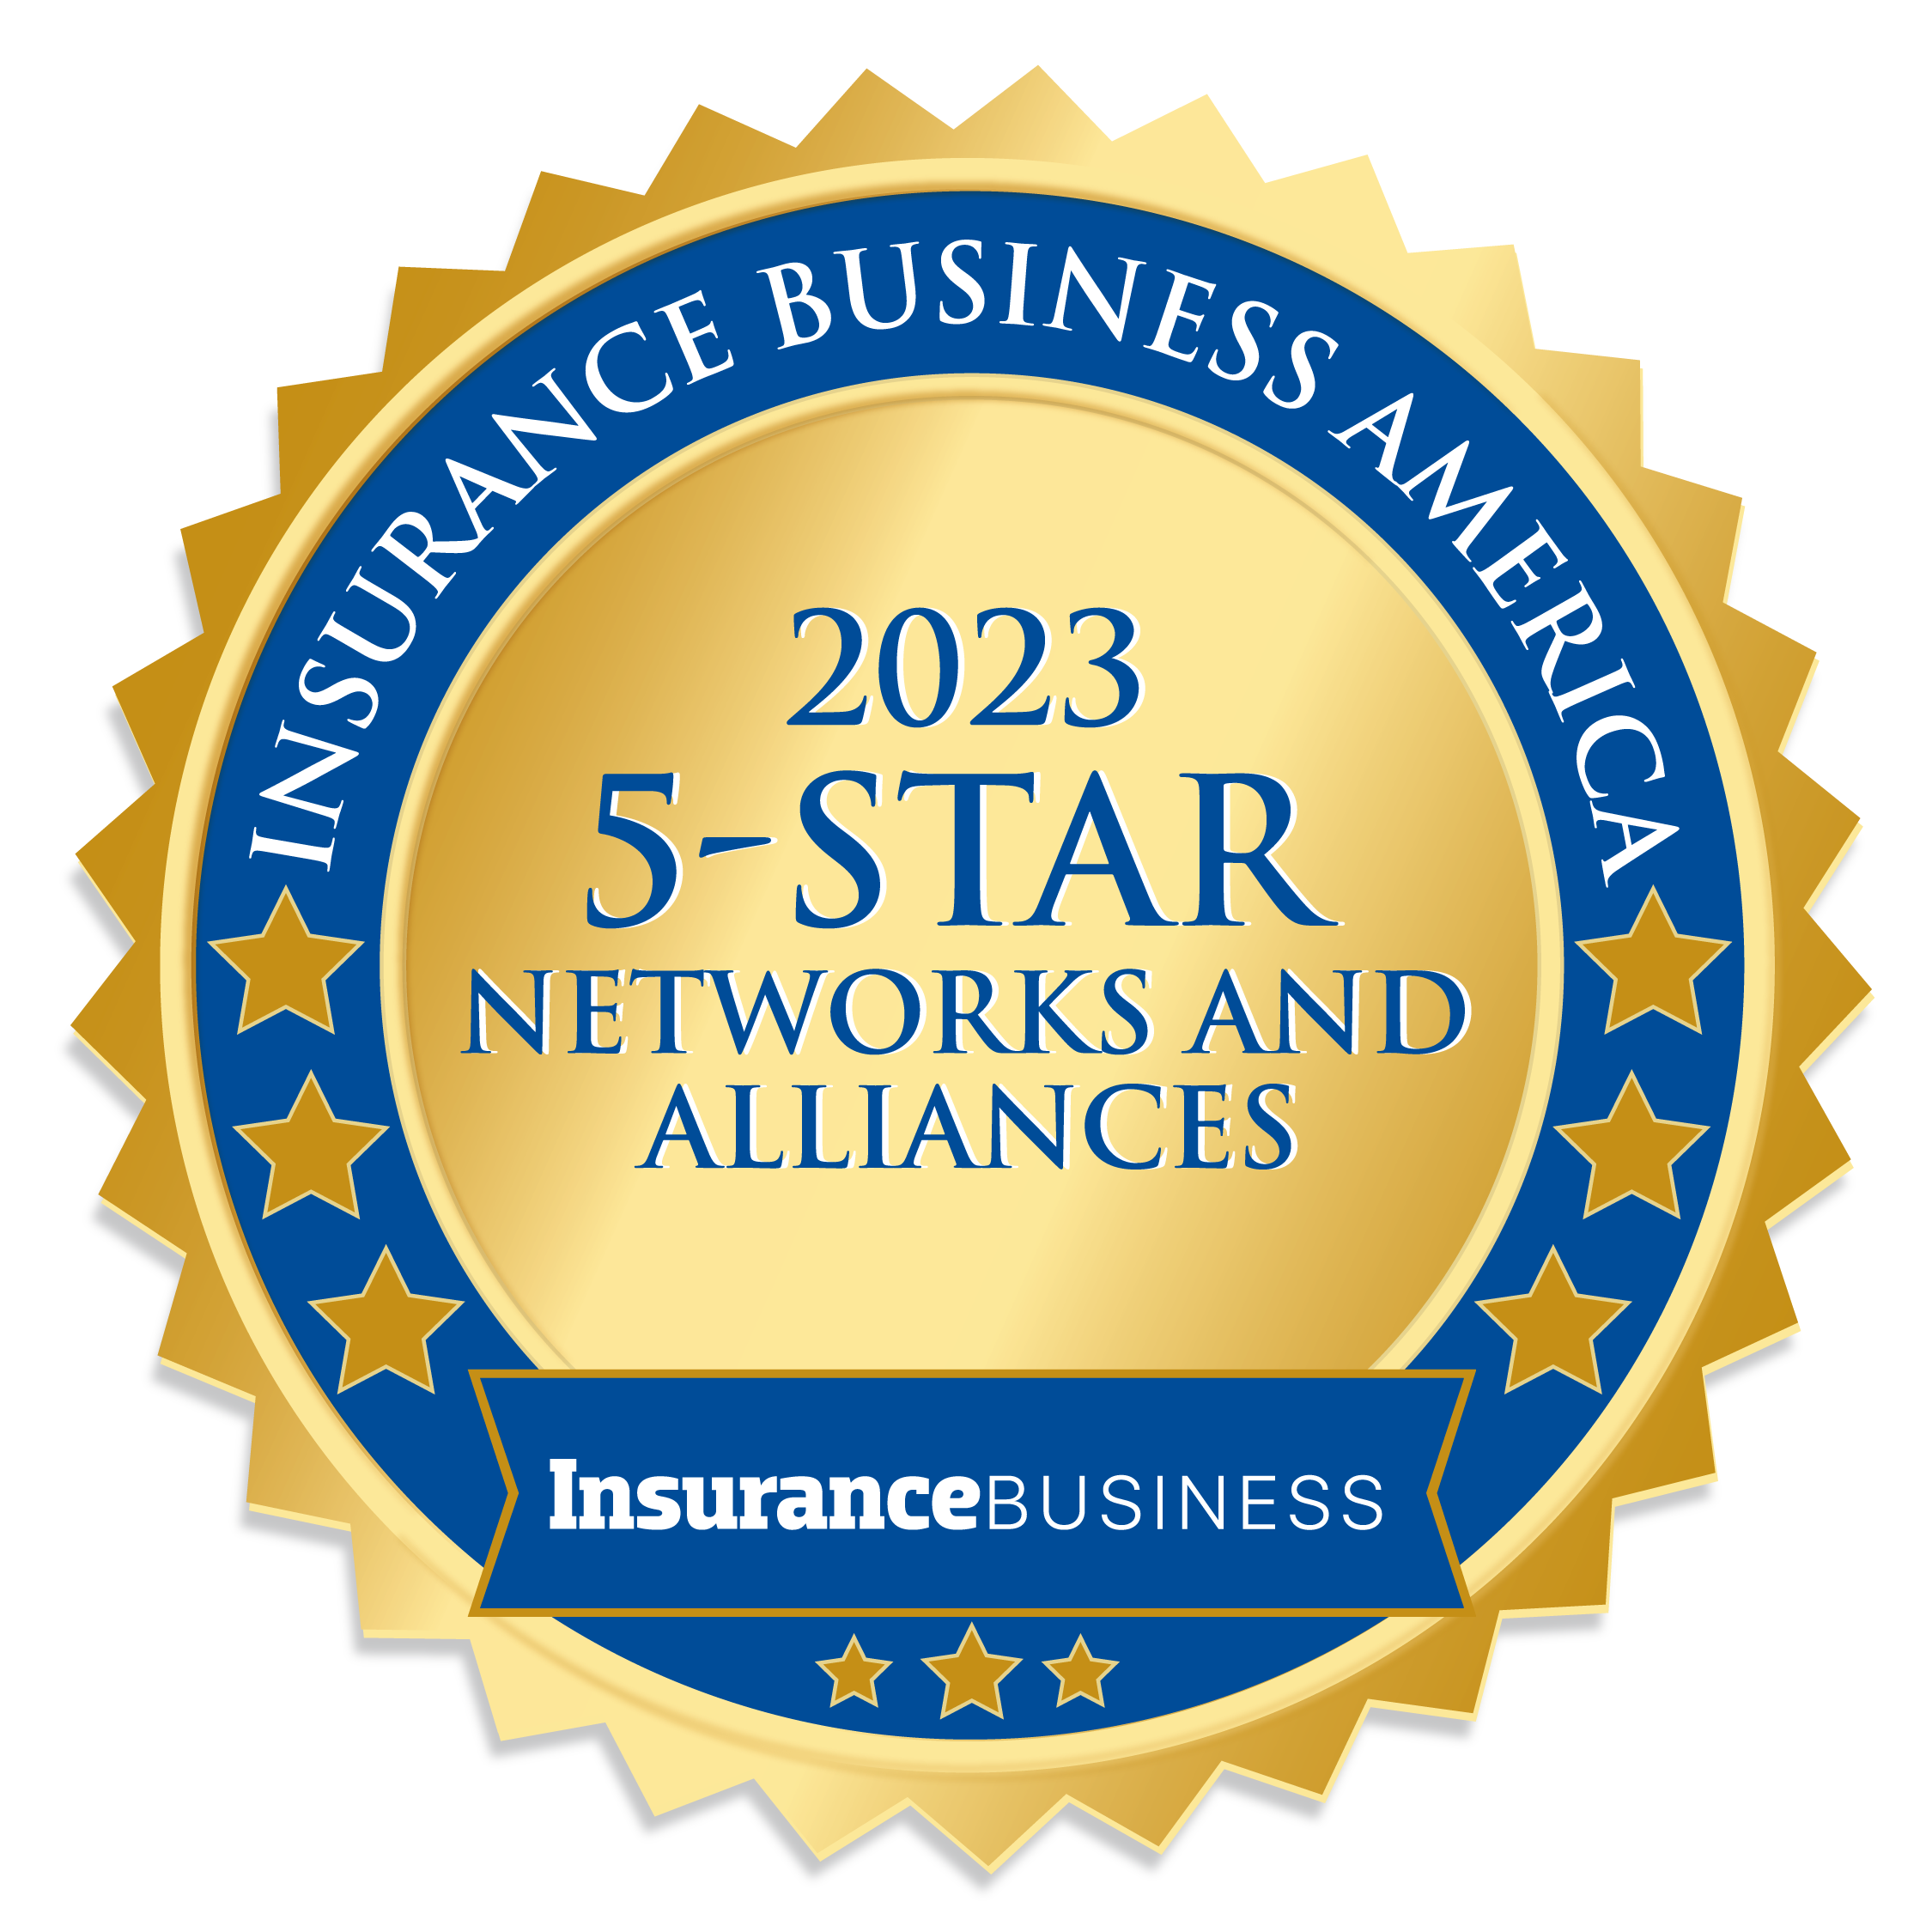 5-Star Insurance Networks and Alliances in the USA